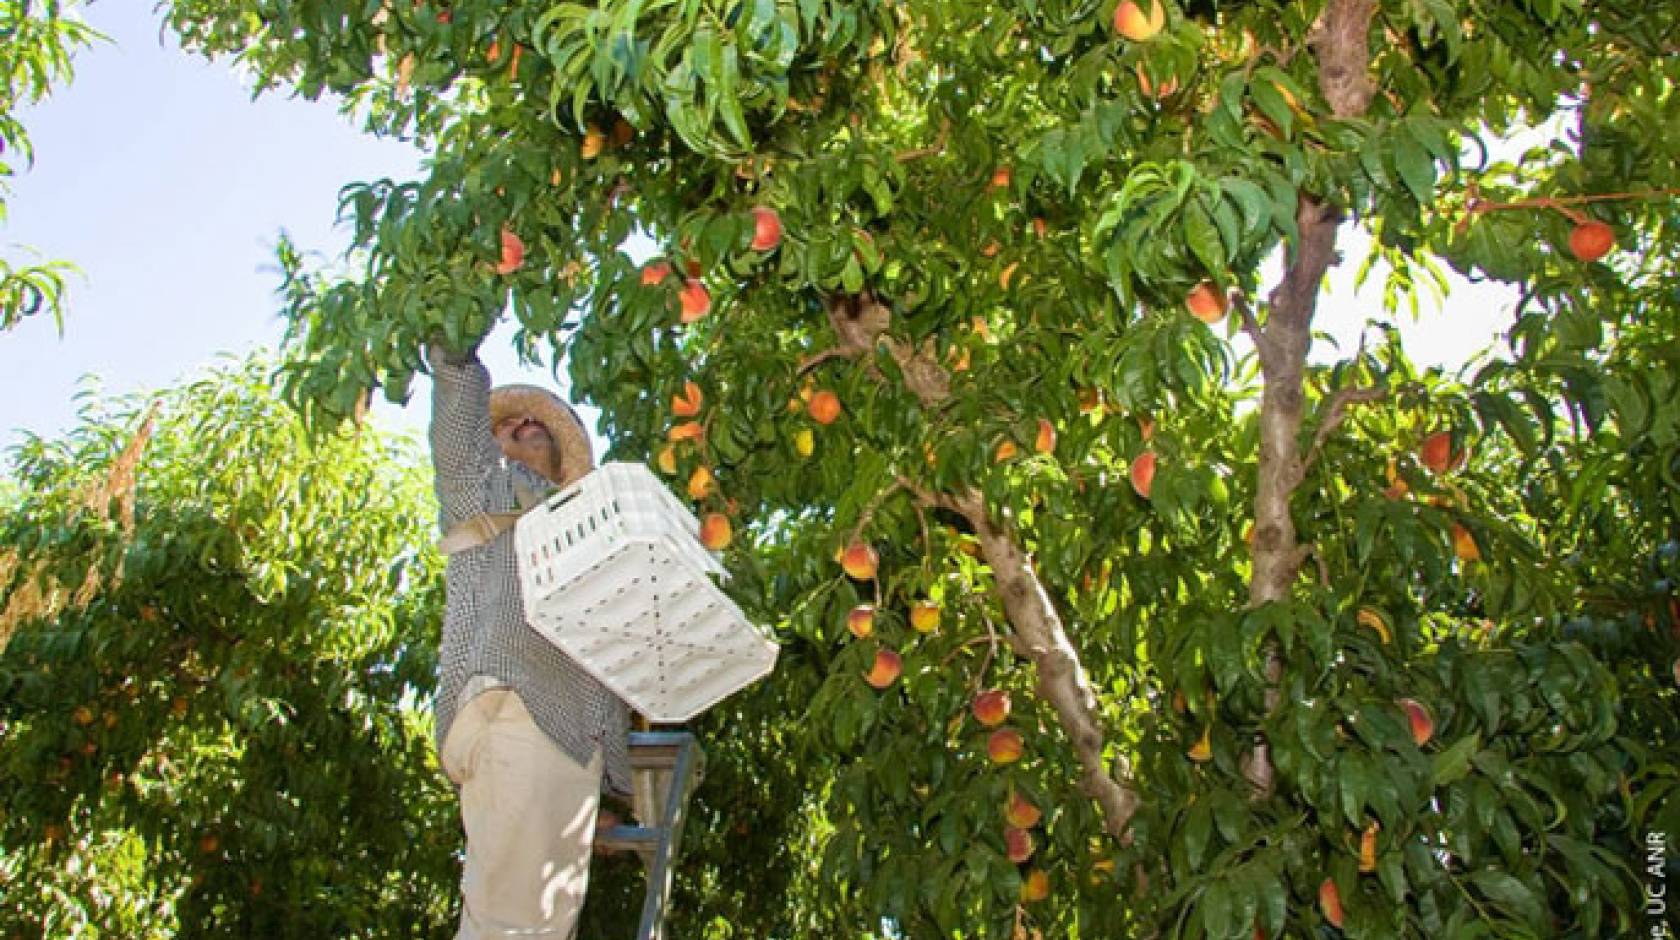 Worker picking fruit from trees